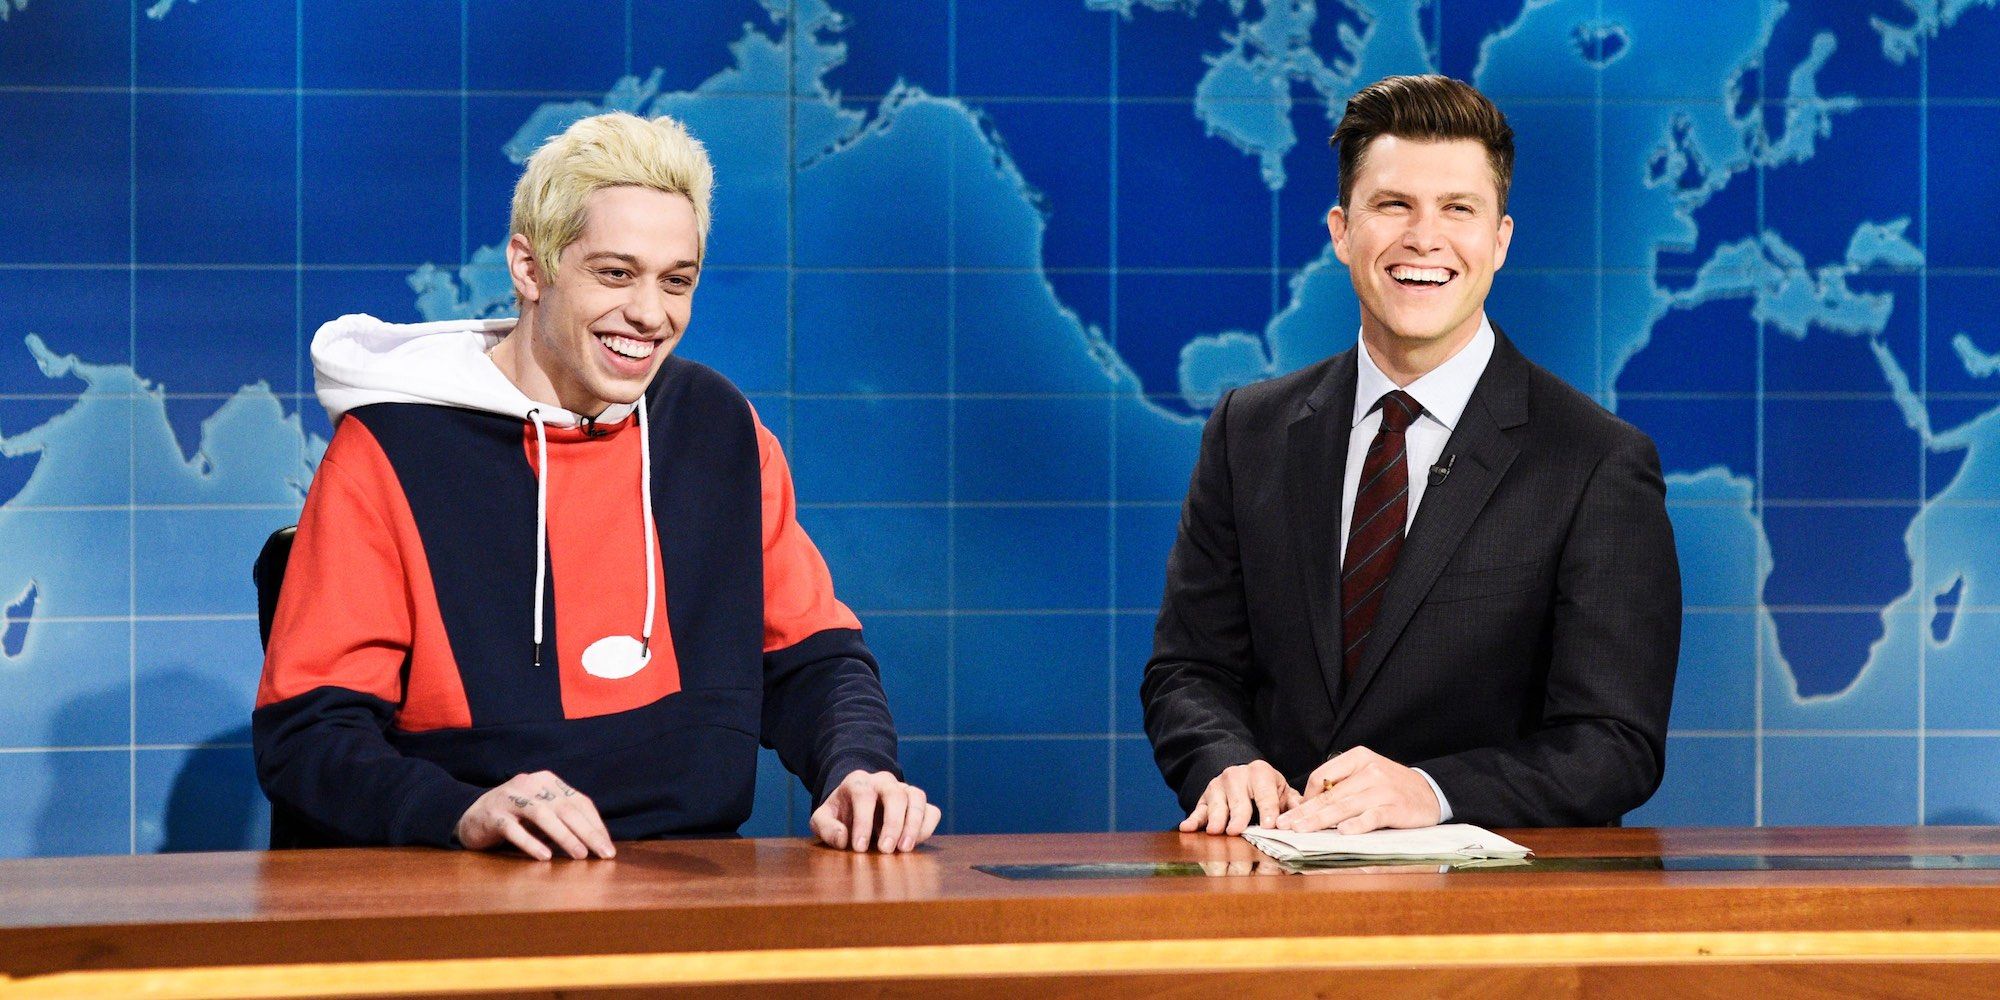 Pete Davidson and Colin Jost smiling in Weekend Update on Saturday Night Live